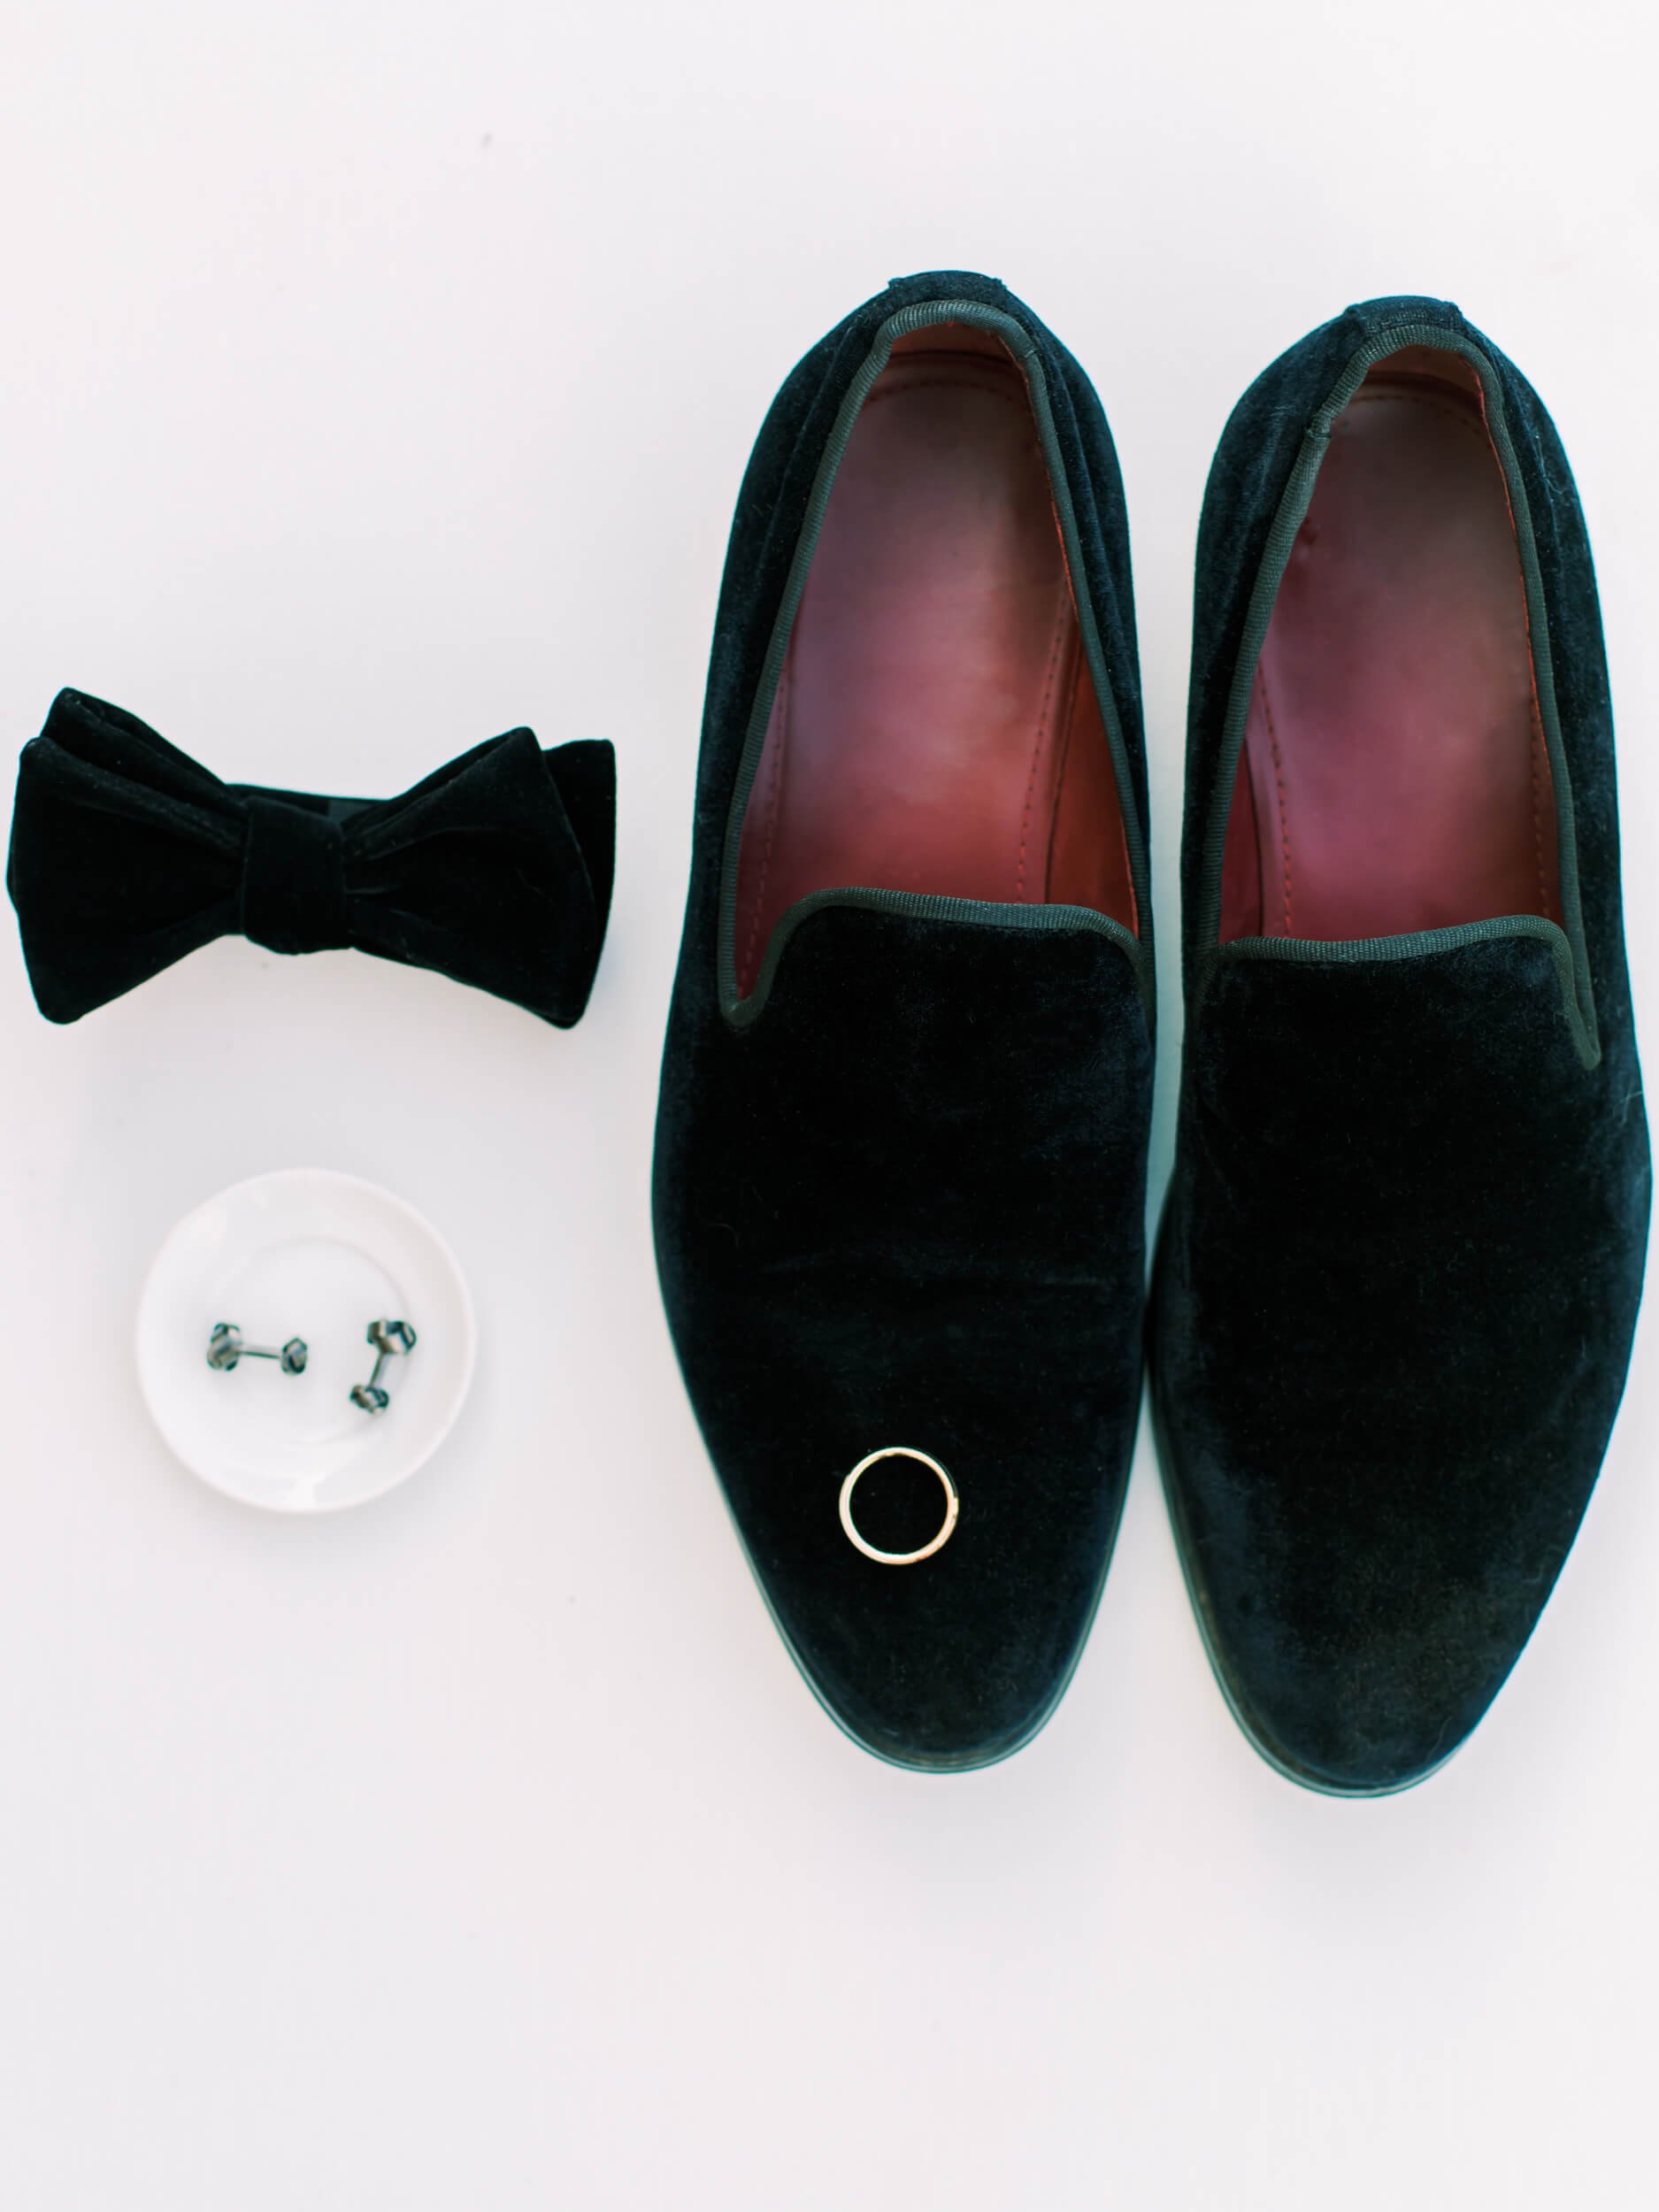 FlatLay_Tip_For_Brides_Tiffany_Sangster_Photography-8.jpg